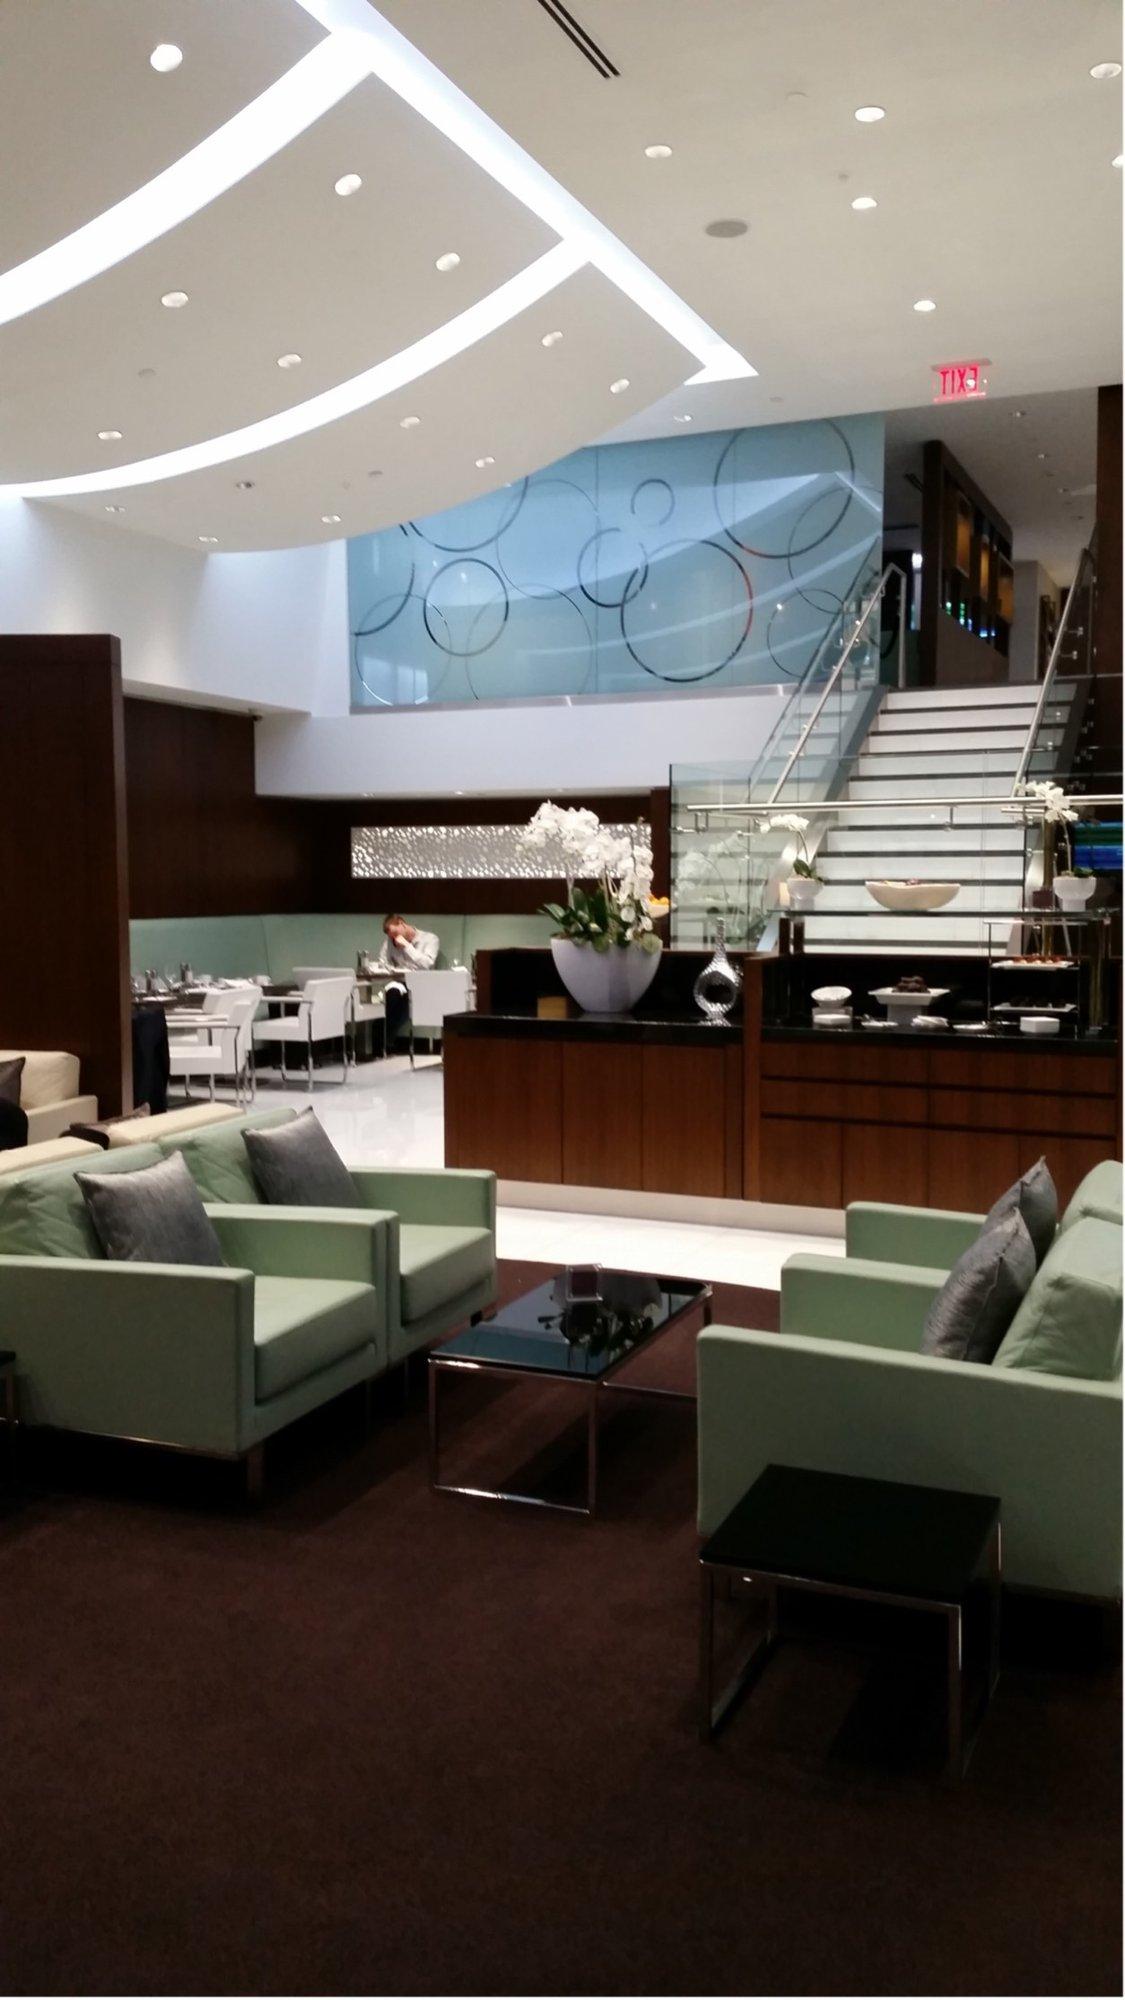 Etihad Airways First & Business Class Lounge image 12 of 17